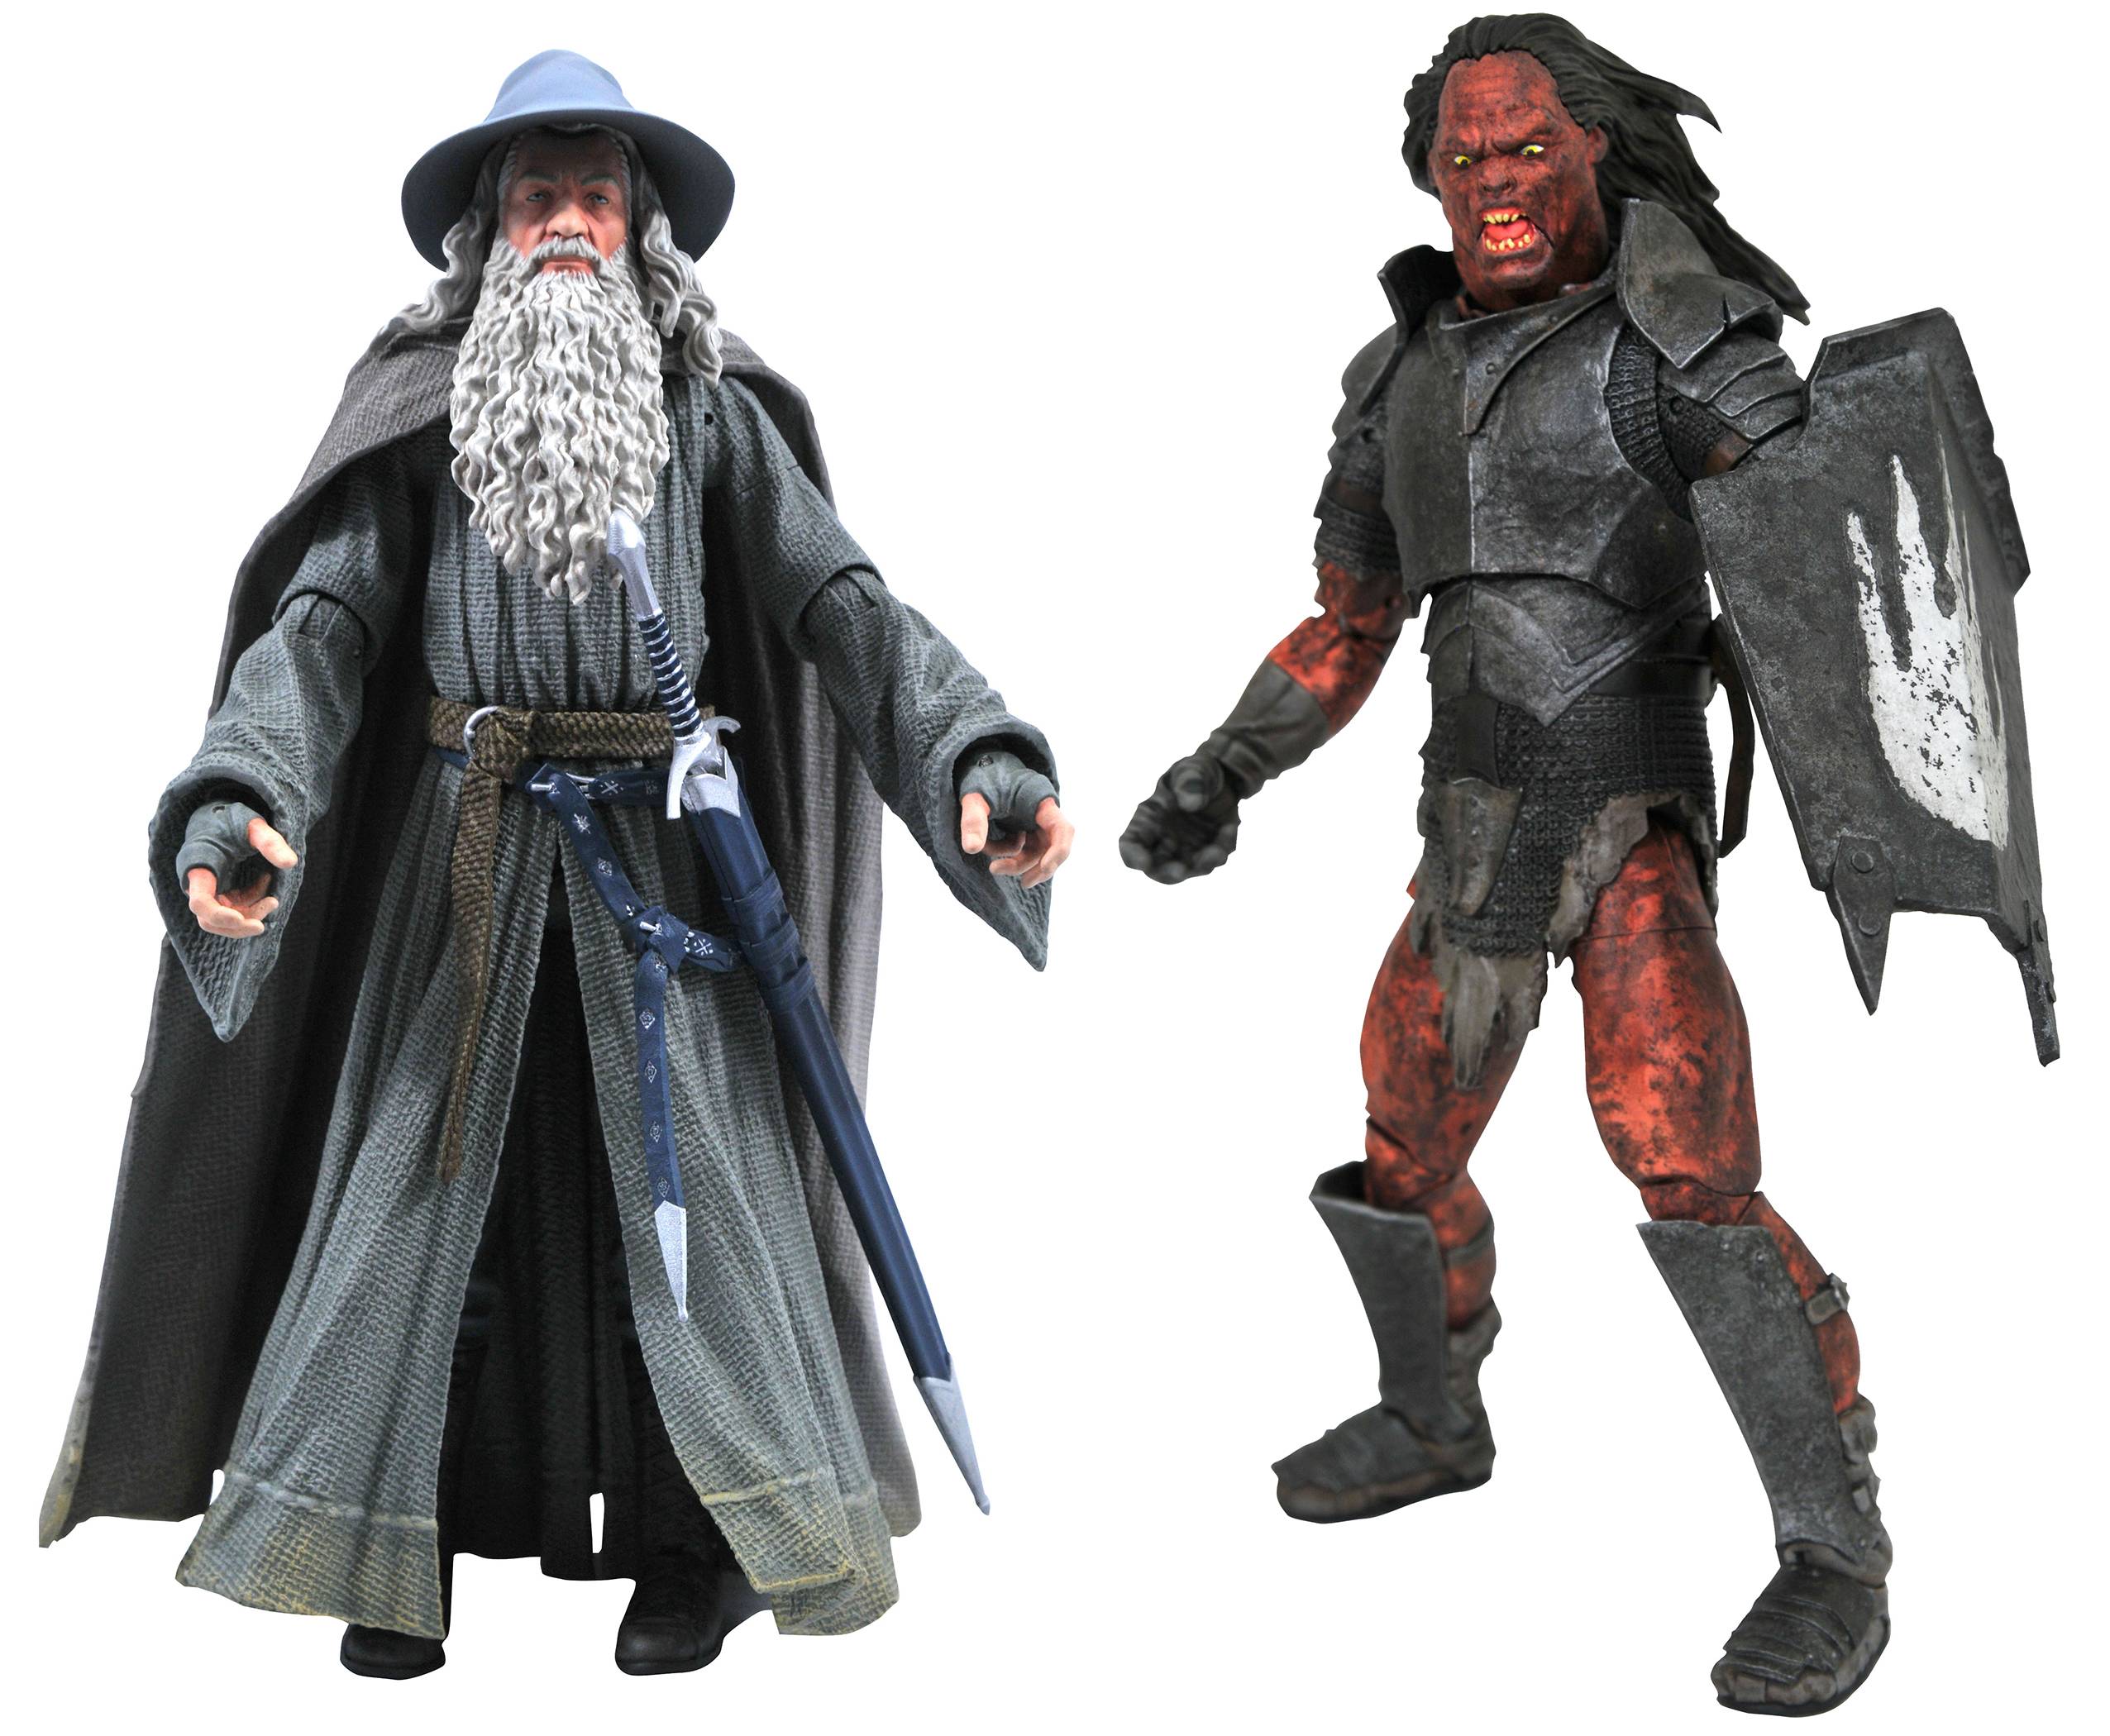 LORD OF THE RINGS DLX AF SERIES 4 ASST